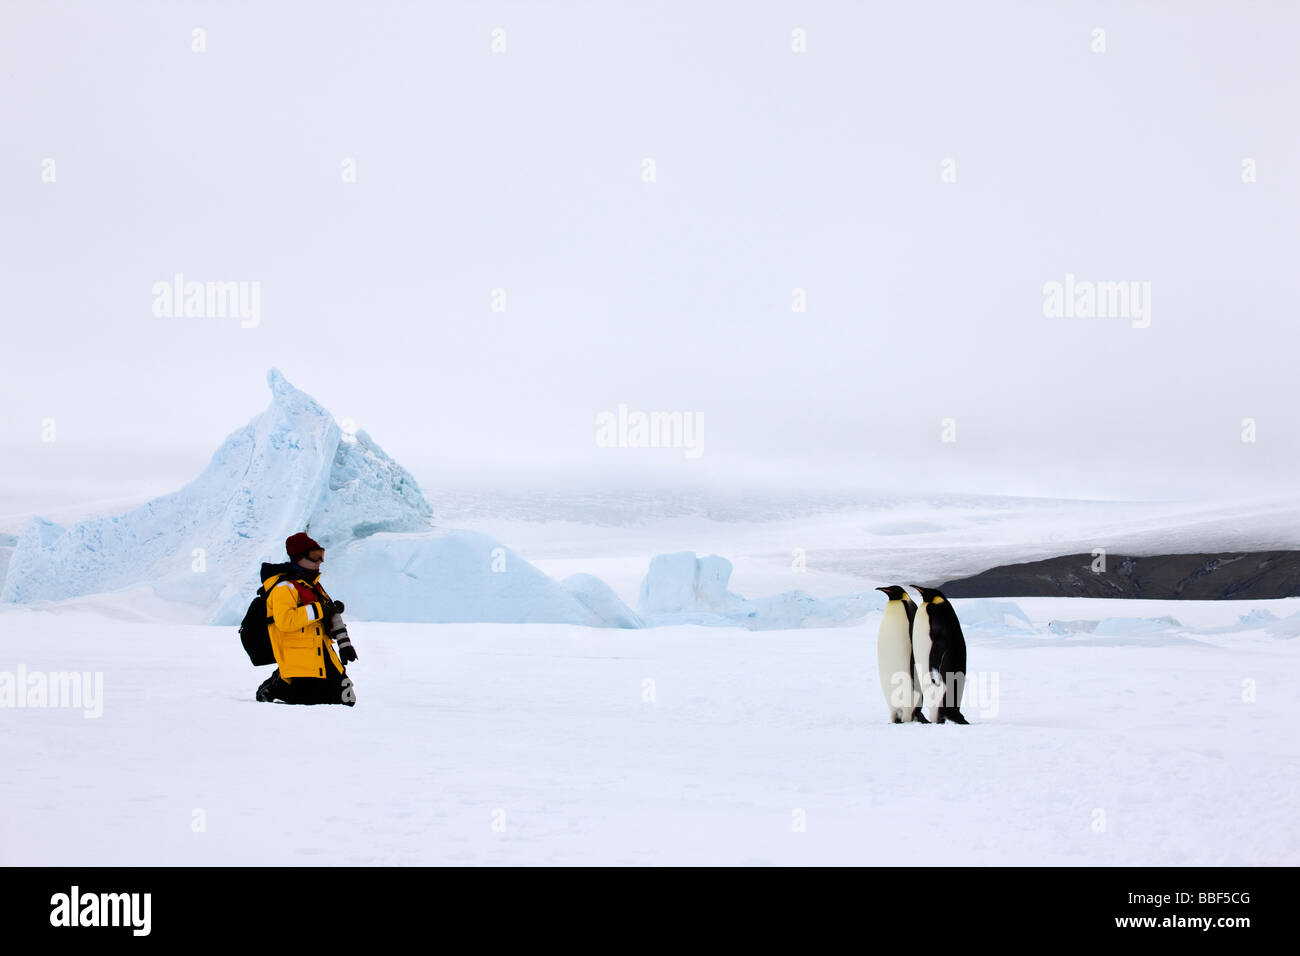 One Photographer with camera pauses in snow to photograph pair of Emperor penguins on Ice attached to Snow Hill Island in the Weddell Sea Antarctica Stock Photo